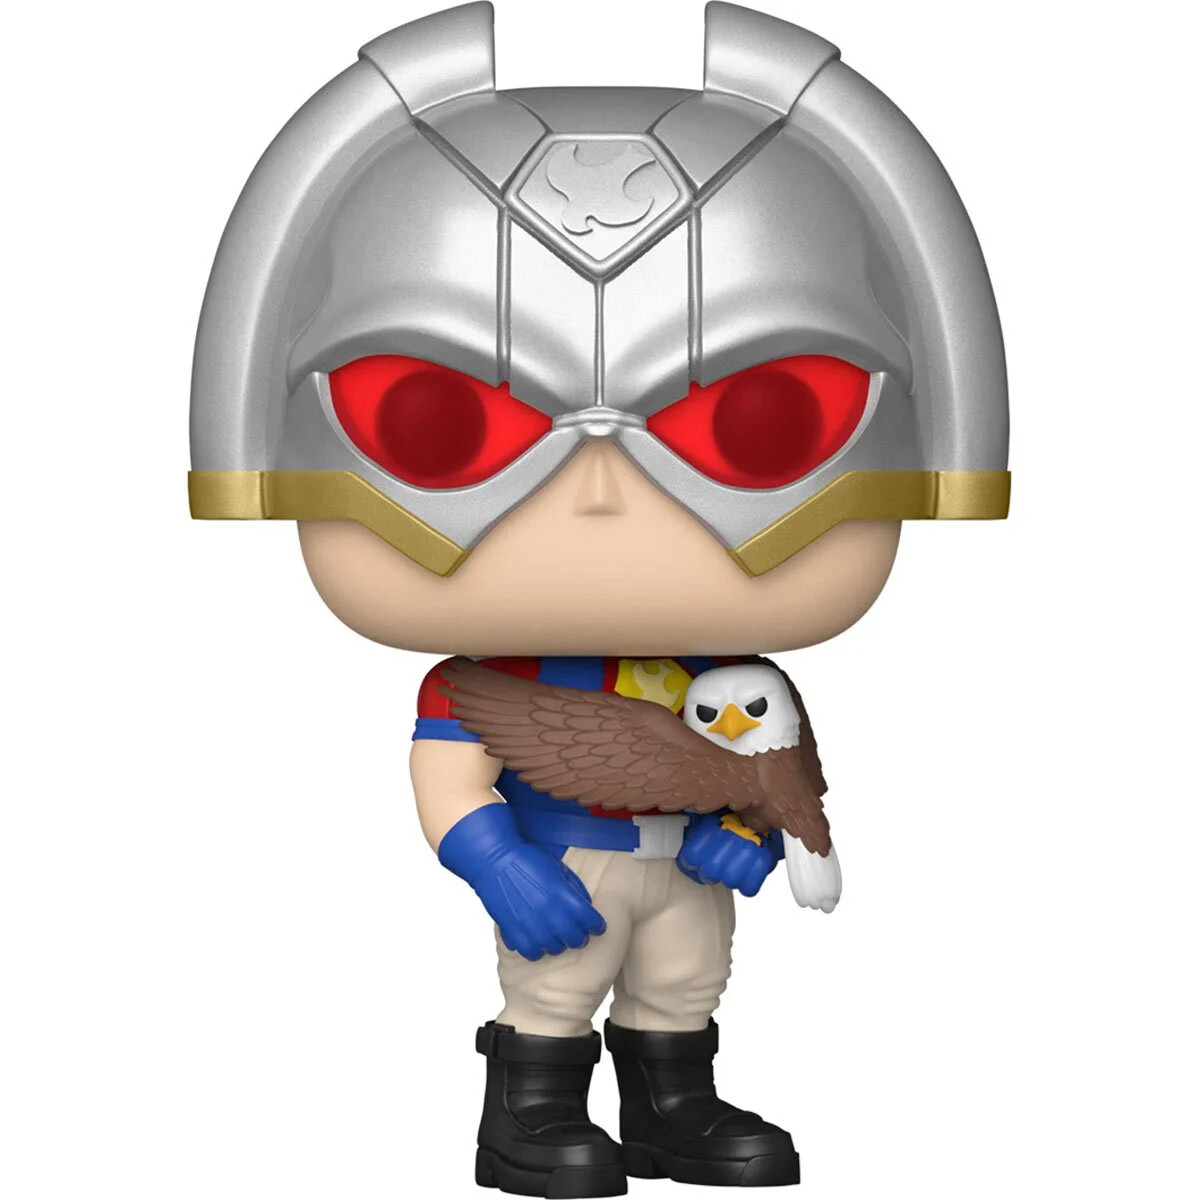 PRE-ORDER Funko Peacemaker with Eagly Pop! Vinyl Figure